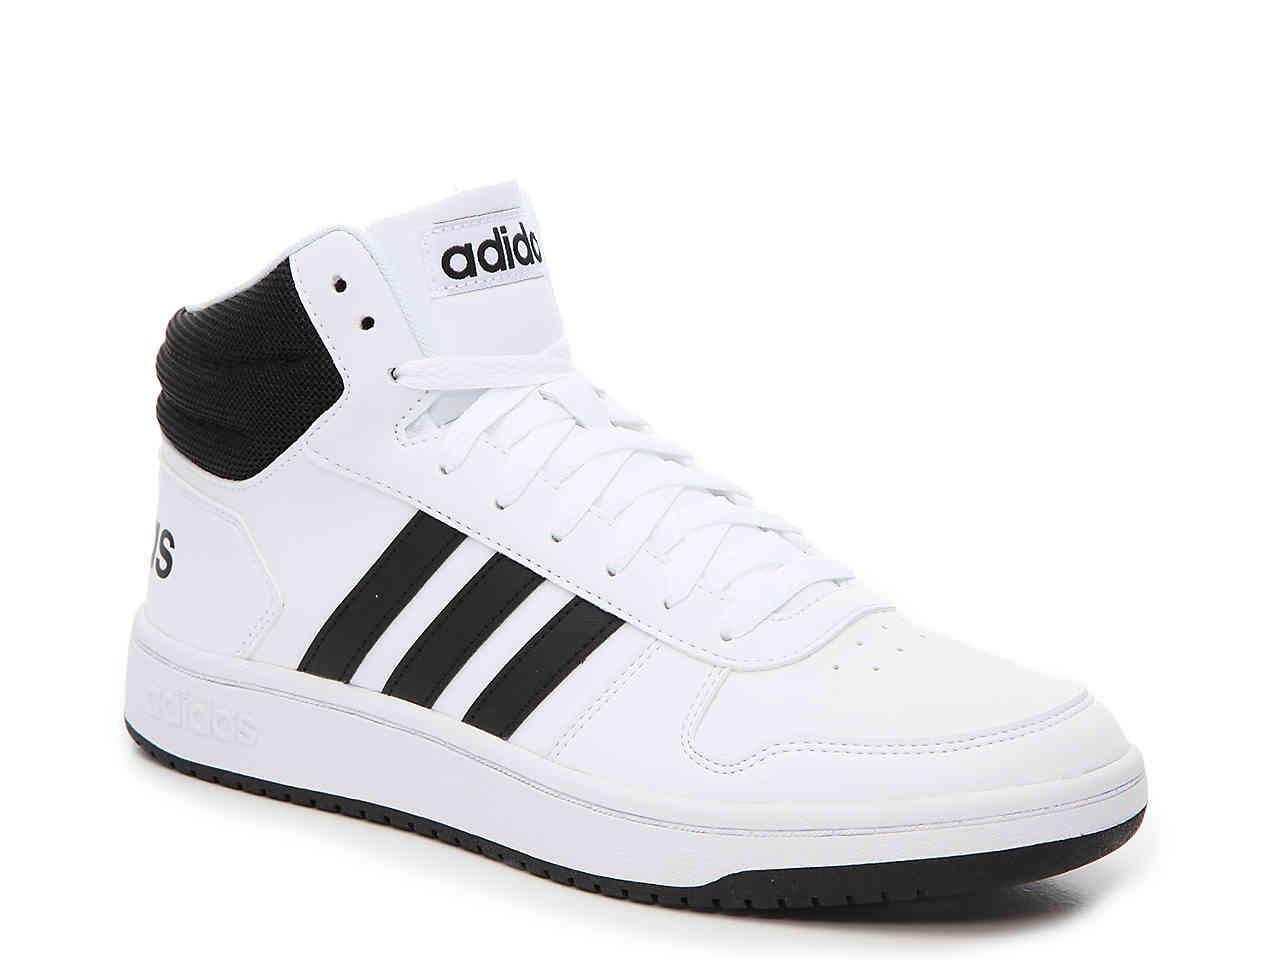 Lyst - adidas Hoops 2.0 Mid-top Sneaker in White for Men